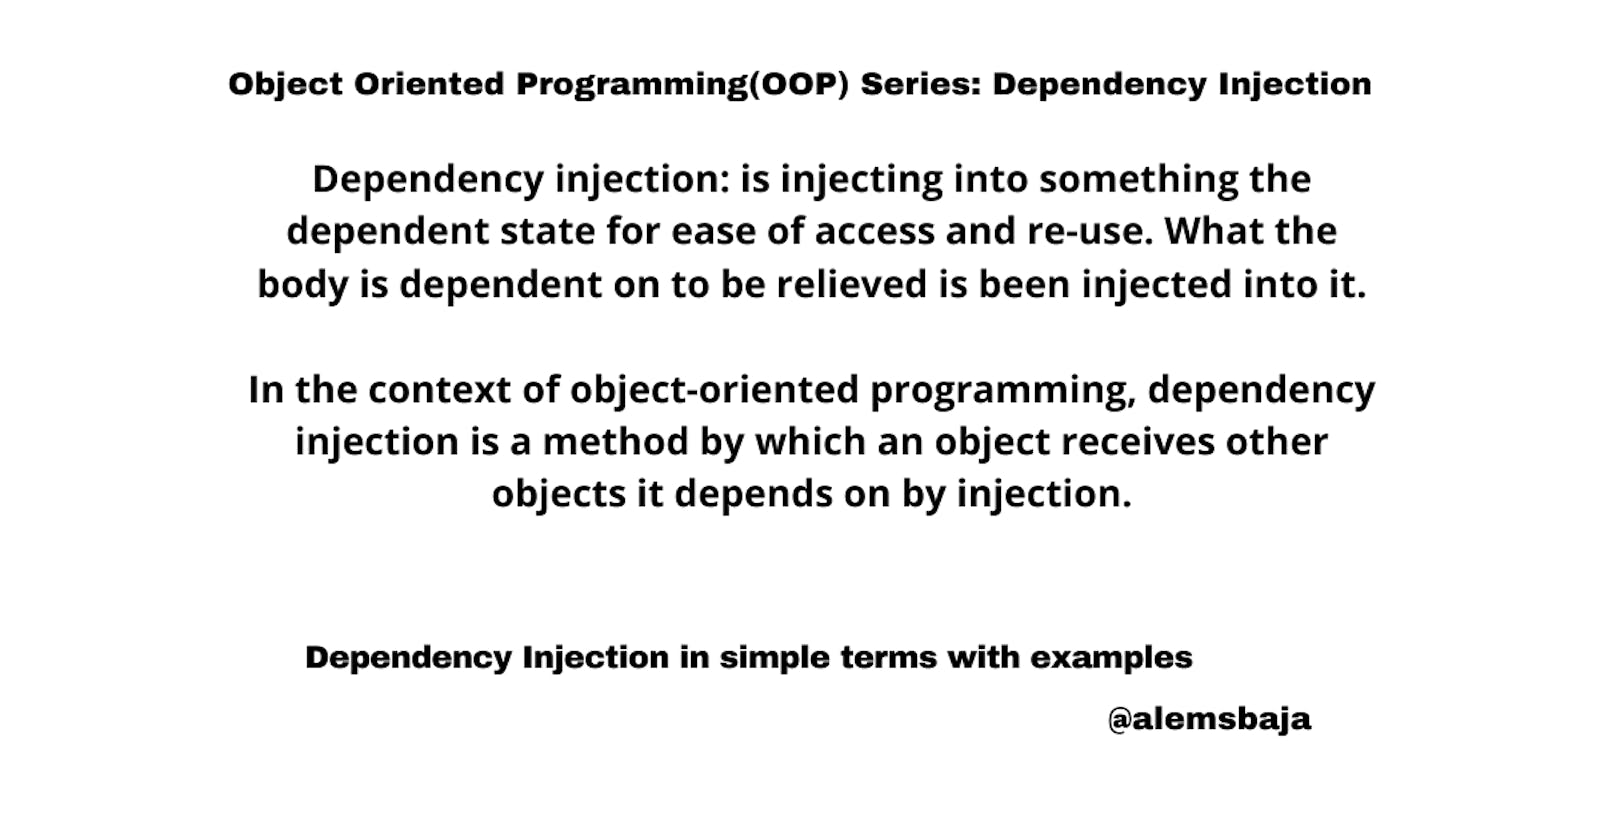 Object Oriented Programming(OOP) Series: Dependency Injection (DI)